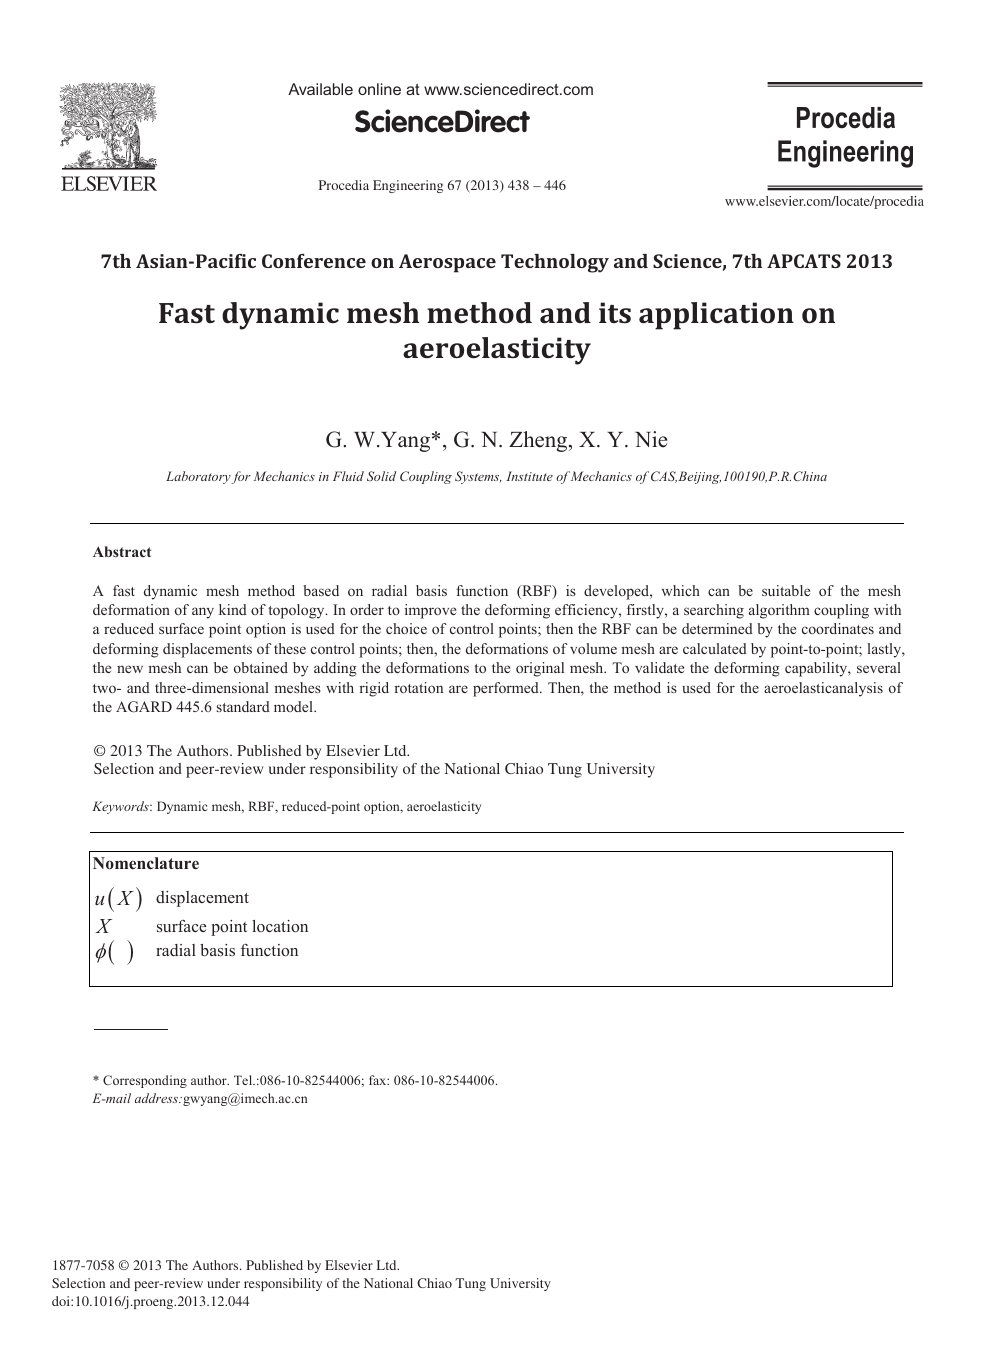 Fast Dynamic Mesh Method And Its Application On Aeroelasticity Topic Of Research Paper In Materials Engineering Download Scholarly Article Pdf And Read For Free On Cyberleninka Open Science Hub